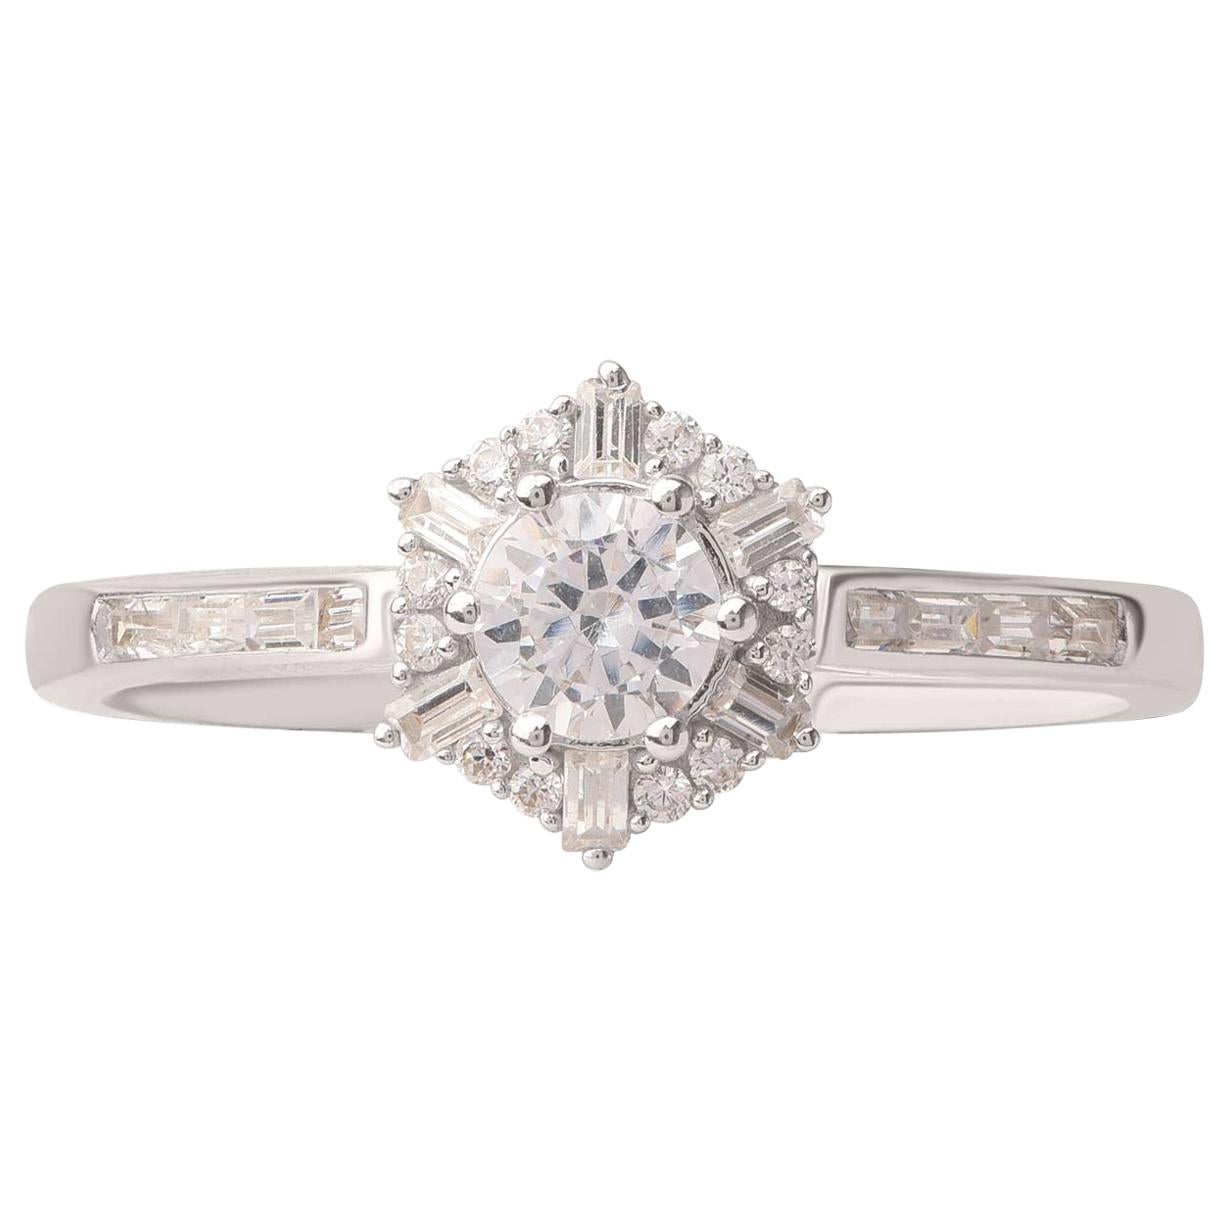 TJD 0.50 Carat Round and Baguette Diamond 18 K White Gold Diamond Cluster Ring